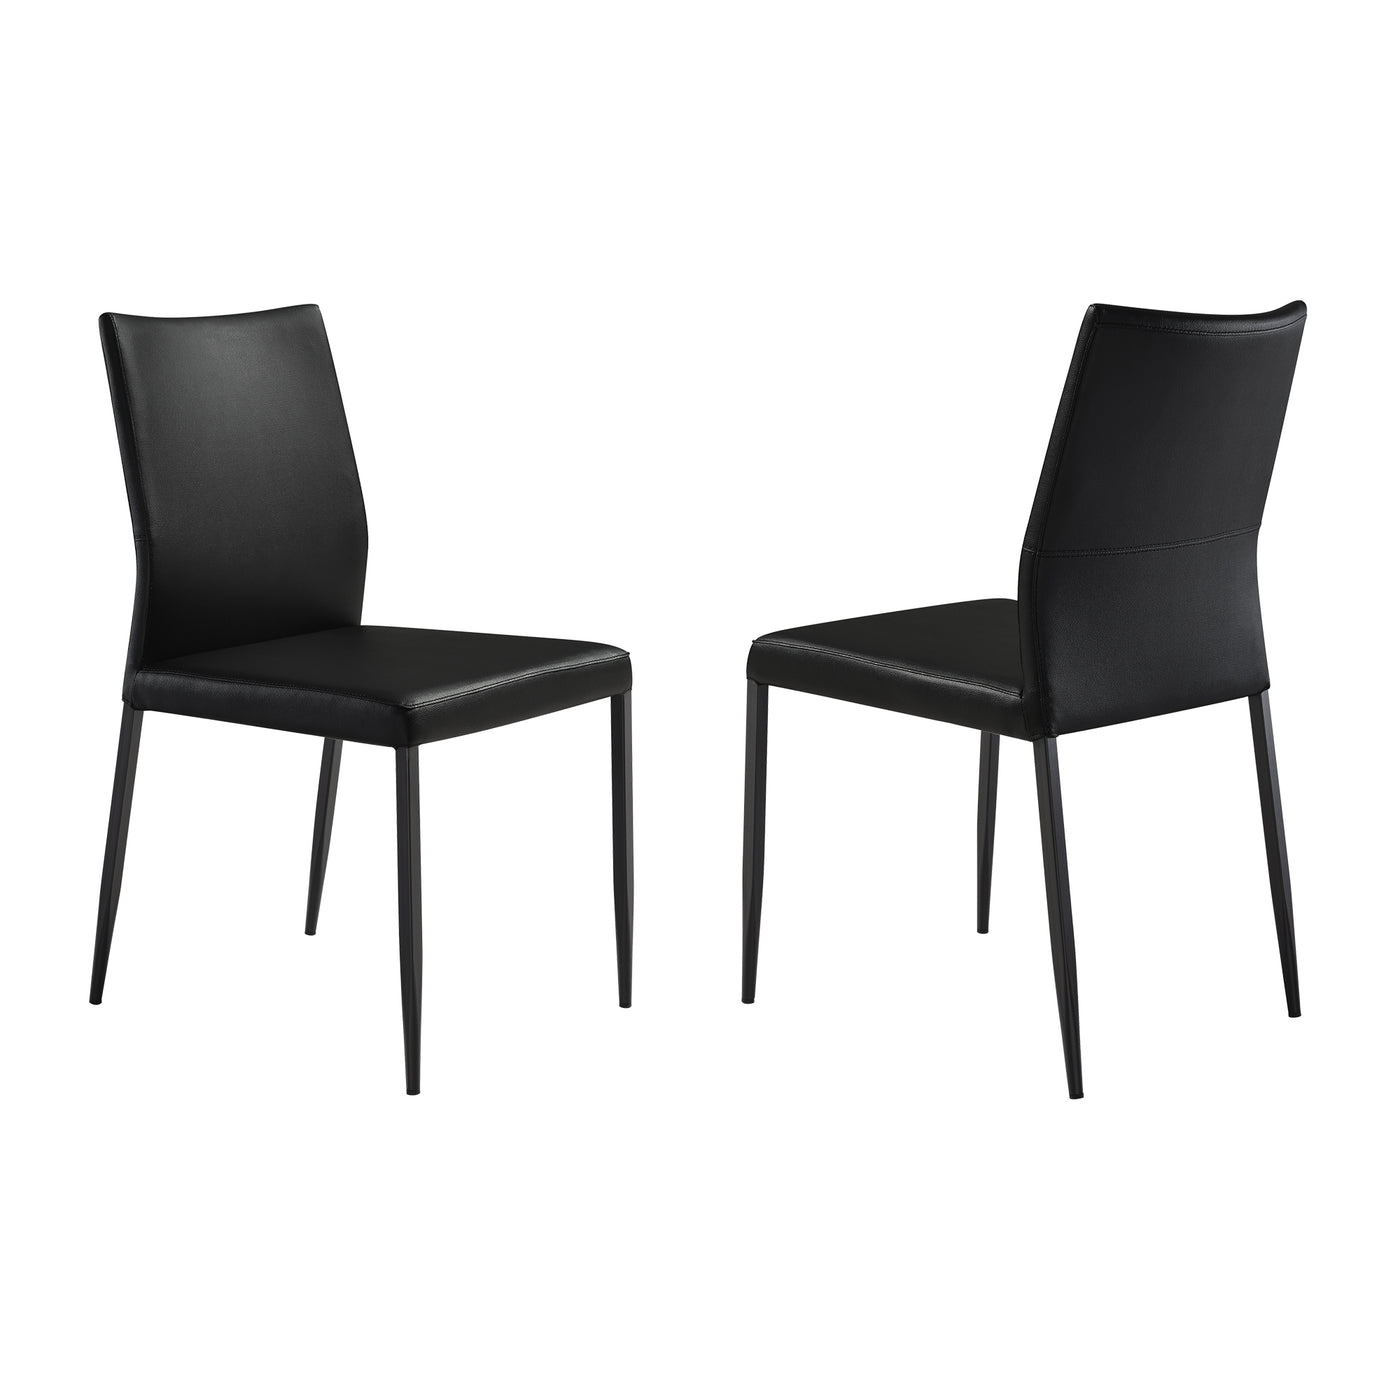 Kash Upholstered Dining Chair Set of 2